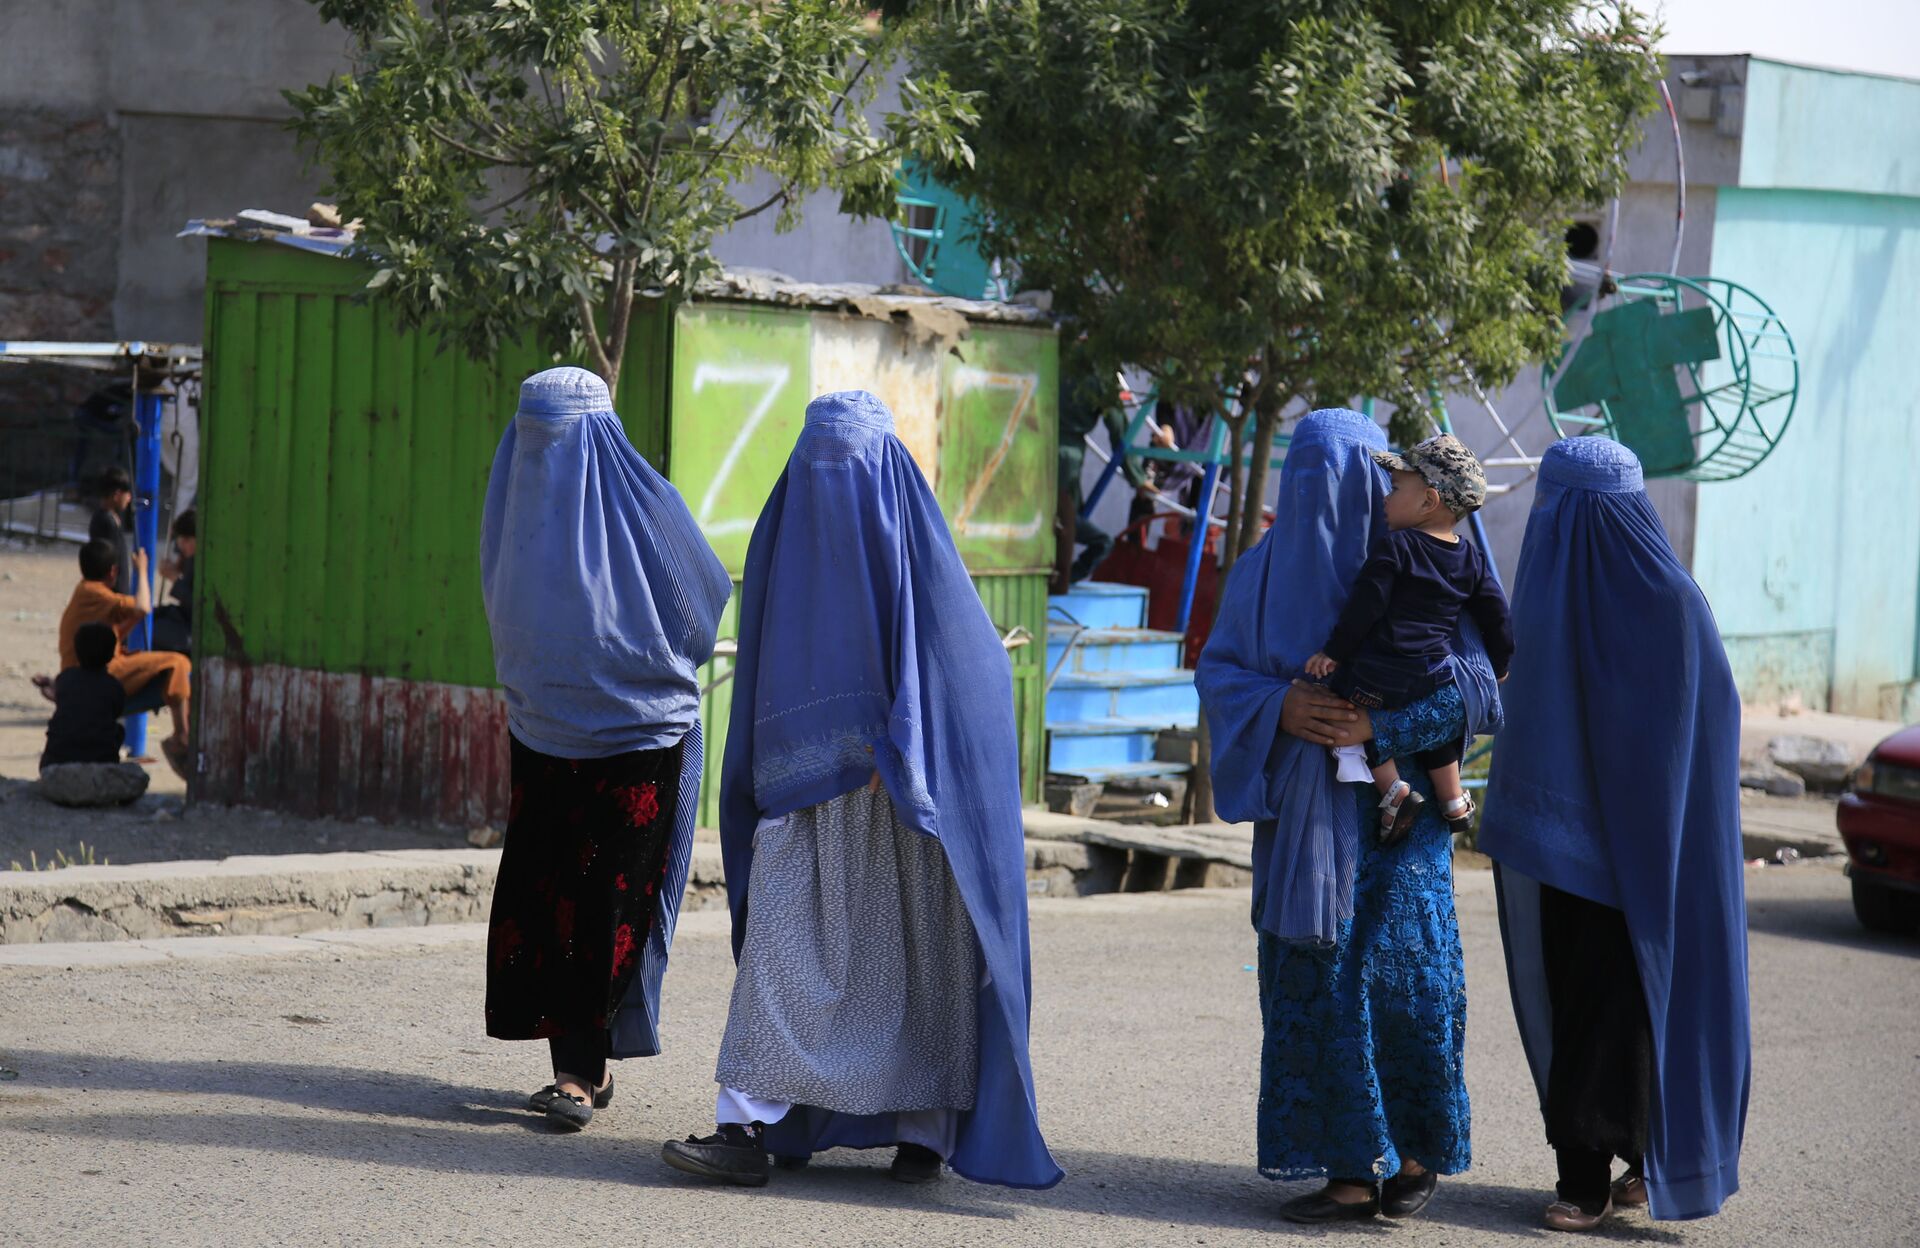 Afghan women walk on the road during the first day of Eid al-Fitr in Kabul, Afghanistan, Thursday, May 13, 2021 - Sputnik International, 1920, 07.09.2021